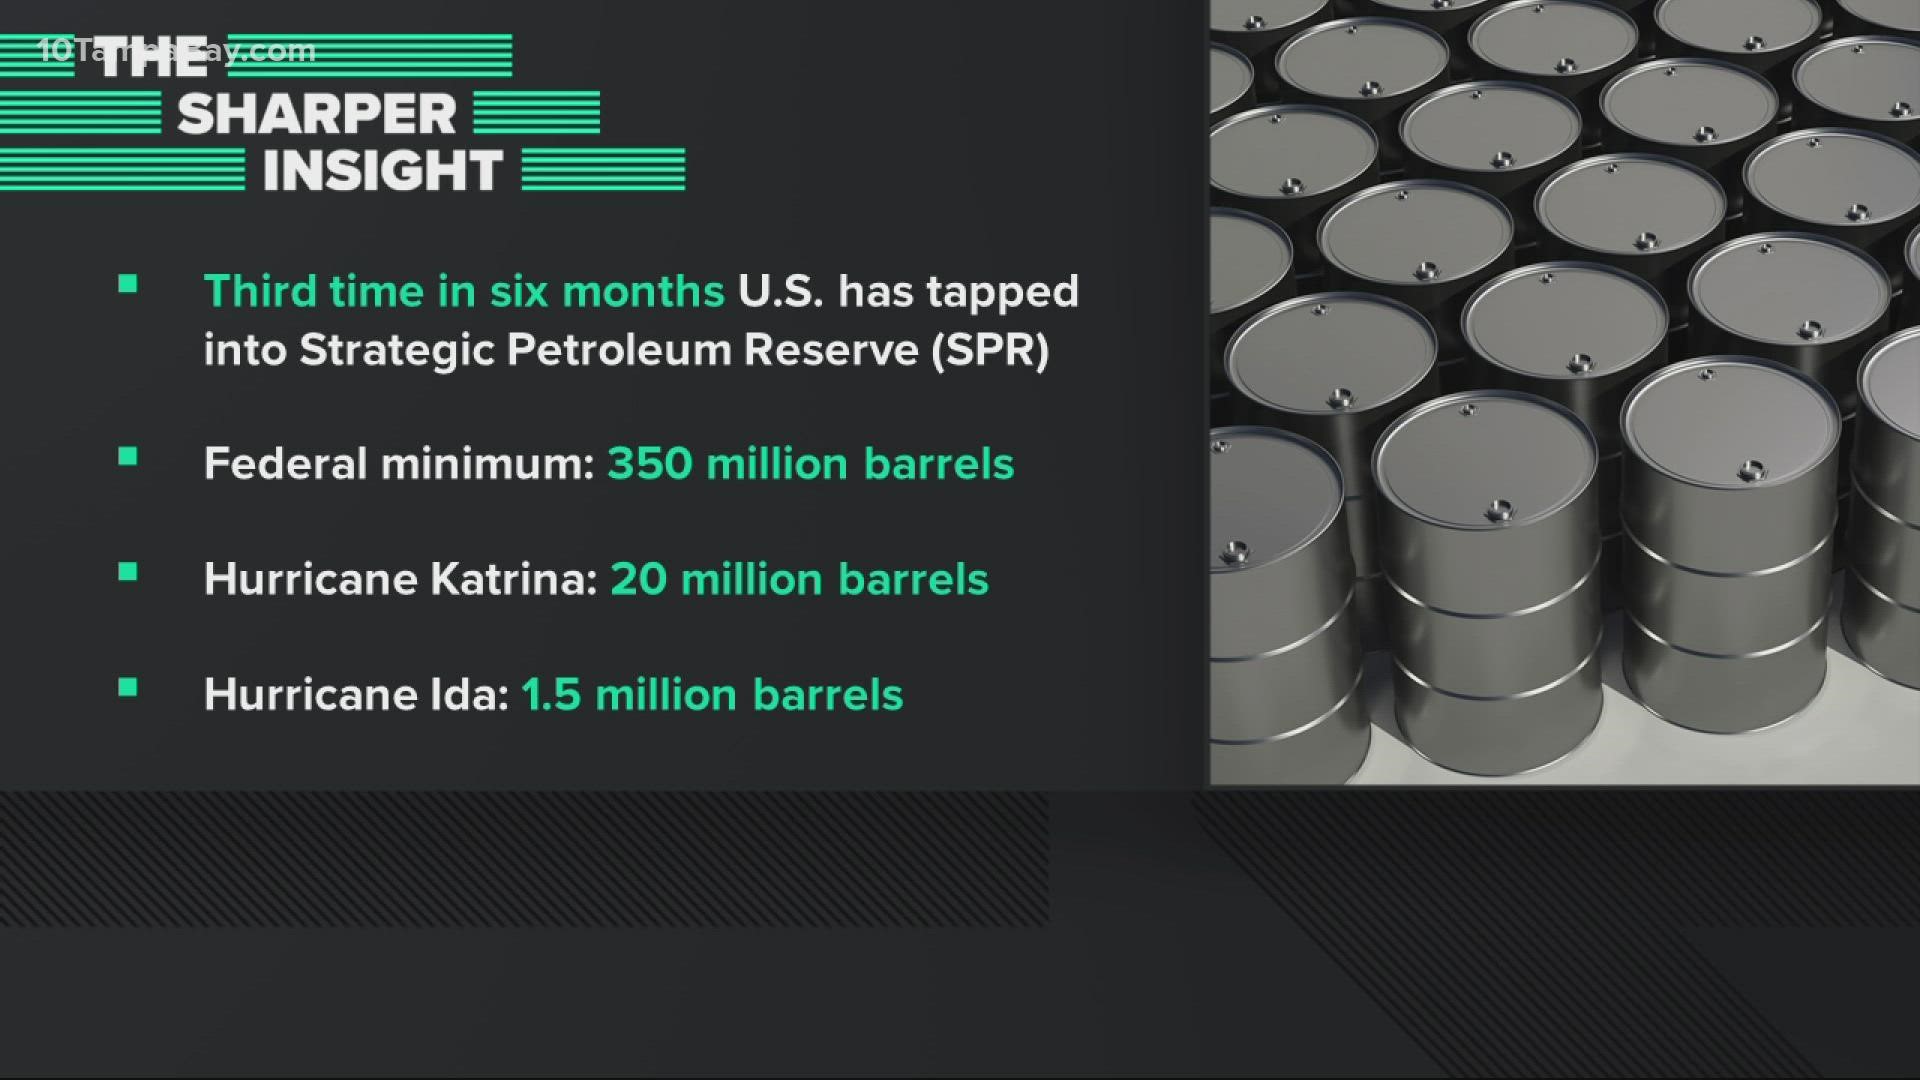 Drawing down 180 million barrels will leave the Strategic Petroleum Reserve at its lowest level since the 1980s.